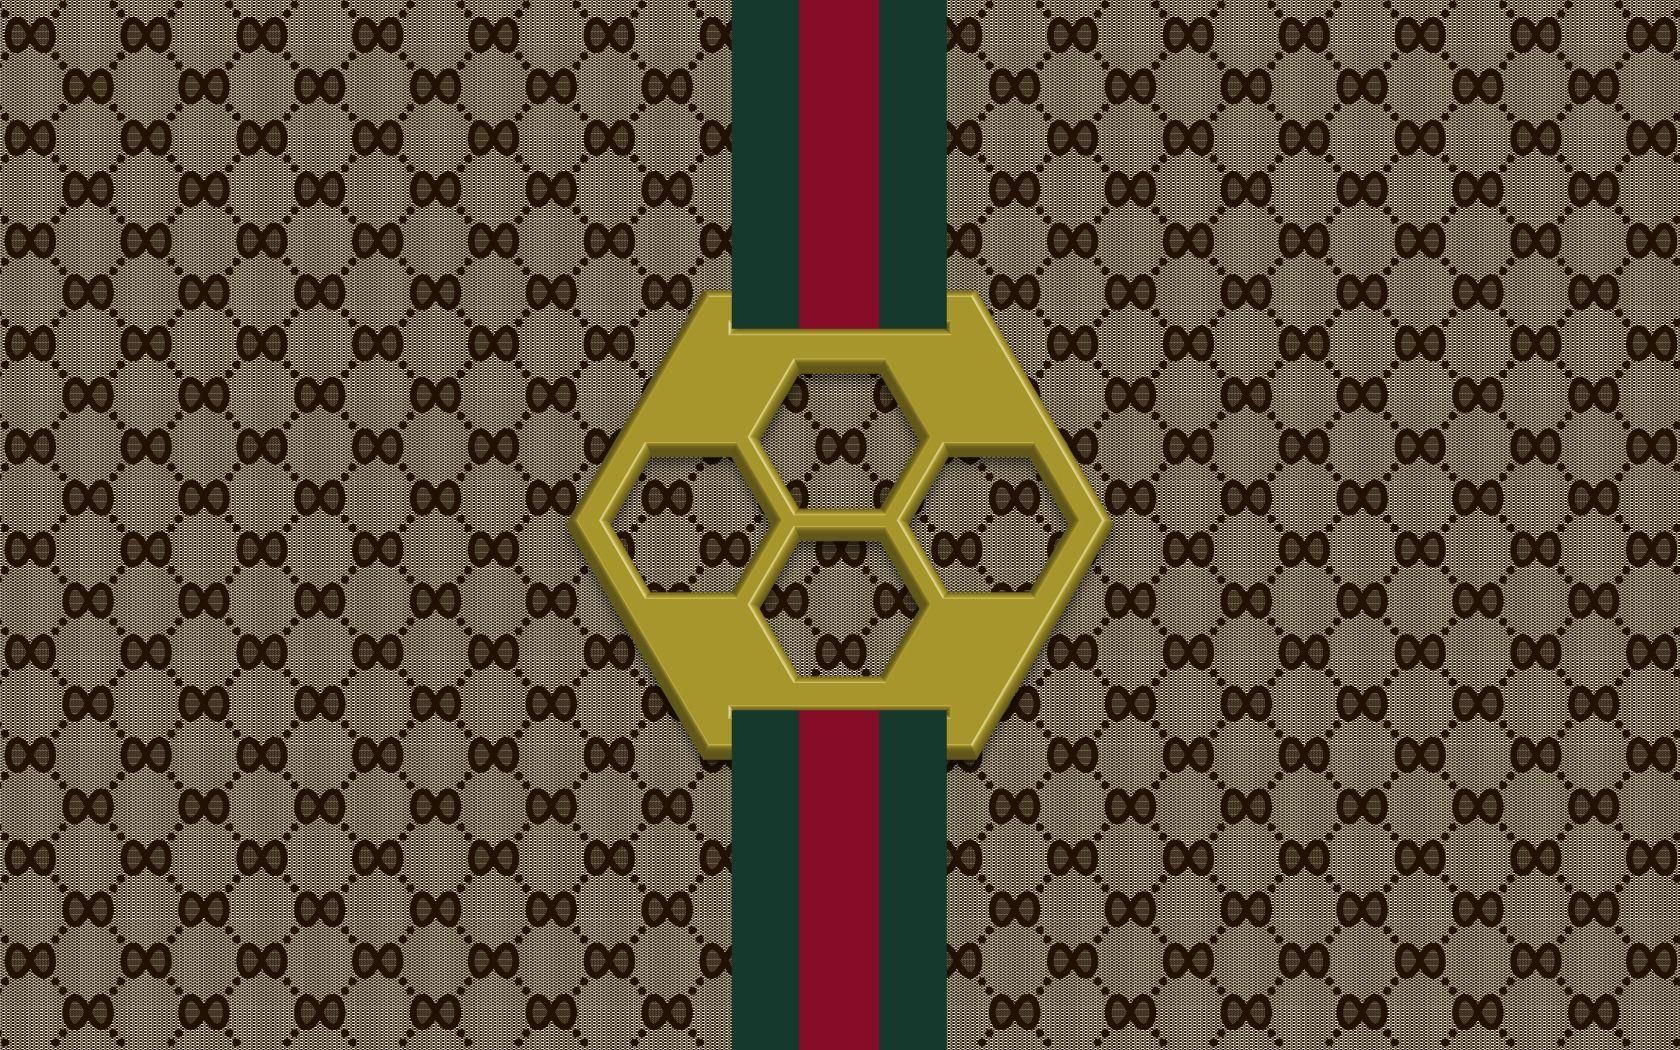 Gucci Wallpapers HD, 43 Gucci HD HD Wallpapers/Backgrounds, NMgnCP